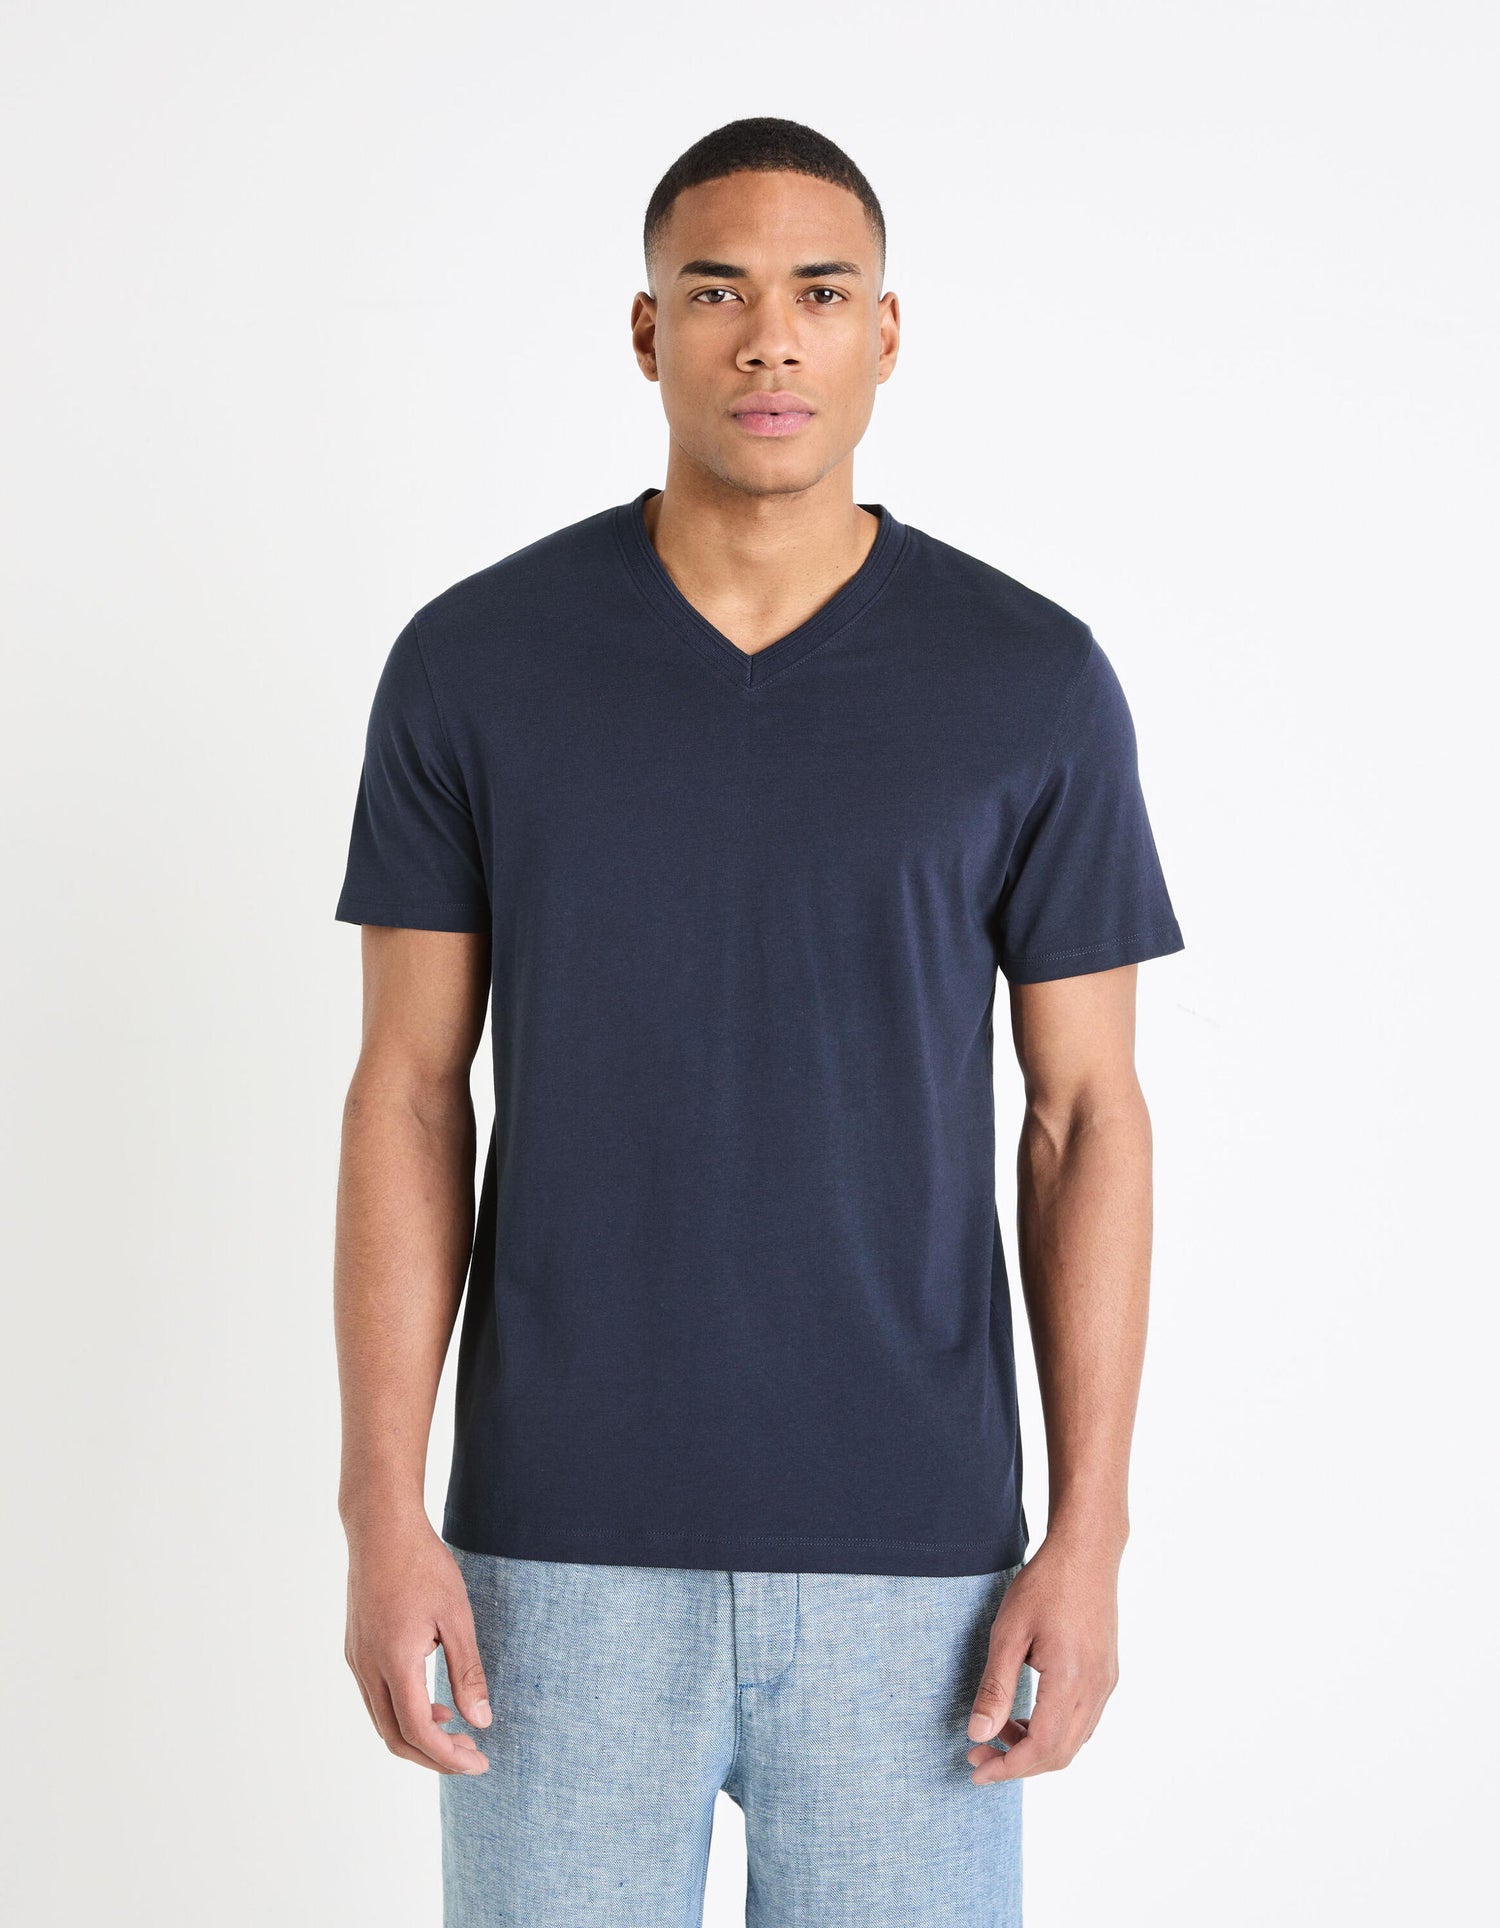 Cotton V-Neck T-Shirt_GENFILE_NAVY_03